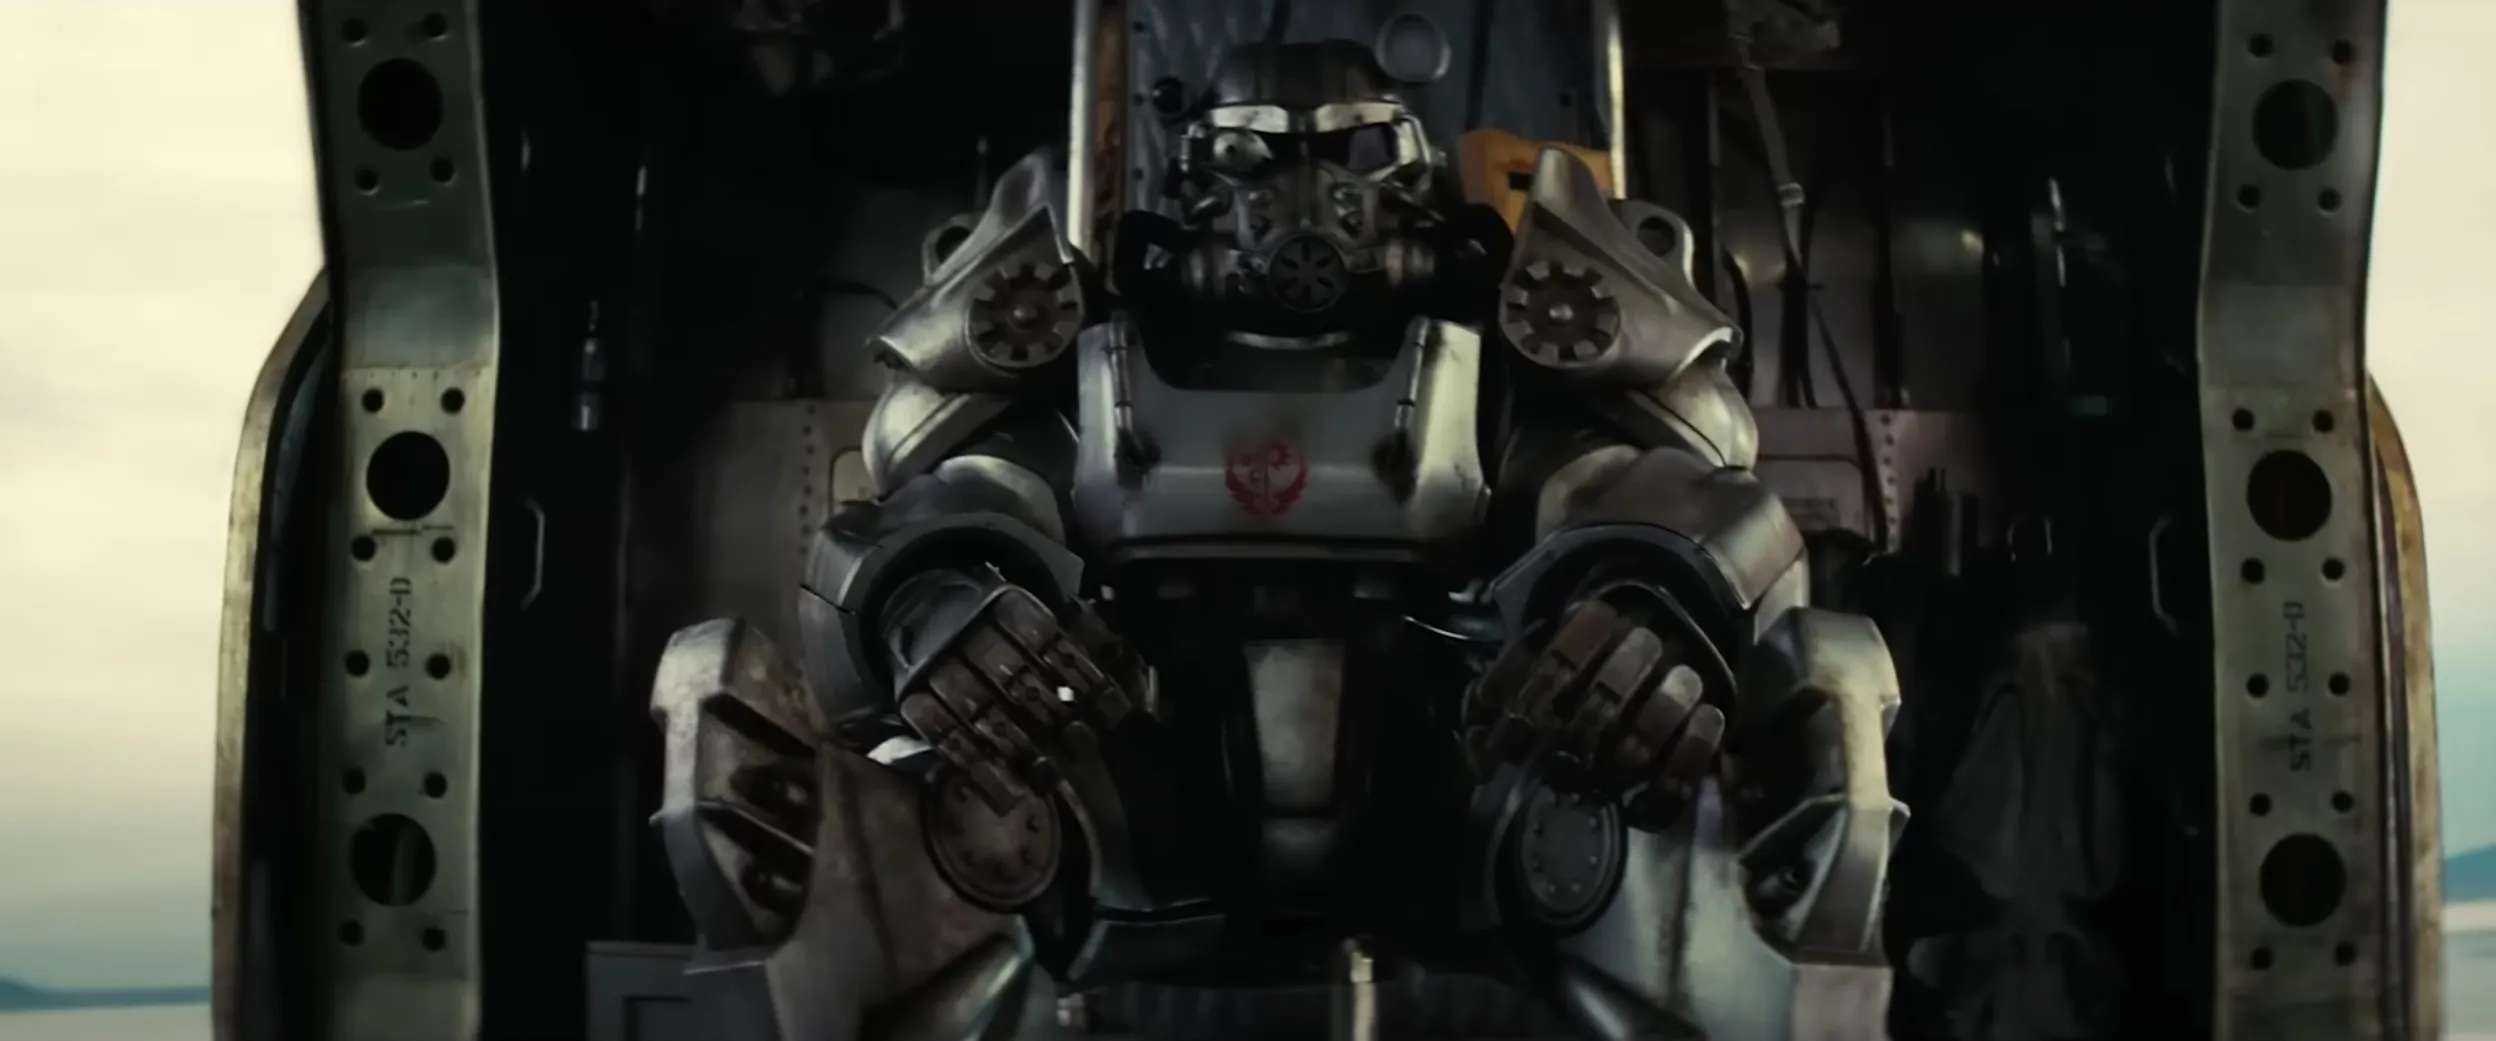 Screencap of someone in Brotherhood of Steel armor in the 'Fallout' show. They are sitting in a Vertibird. 